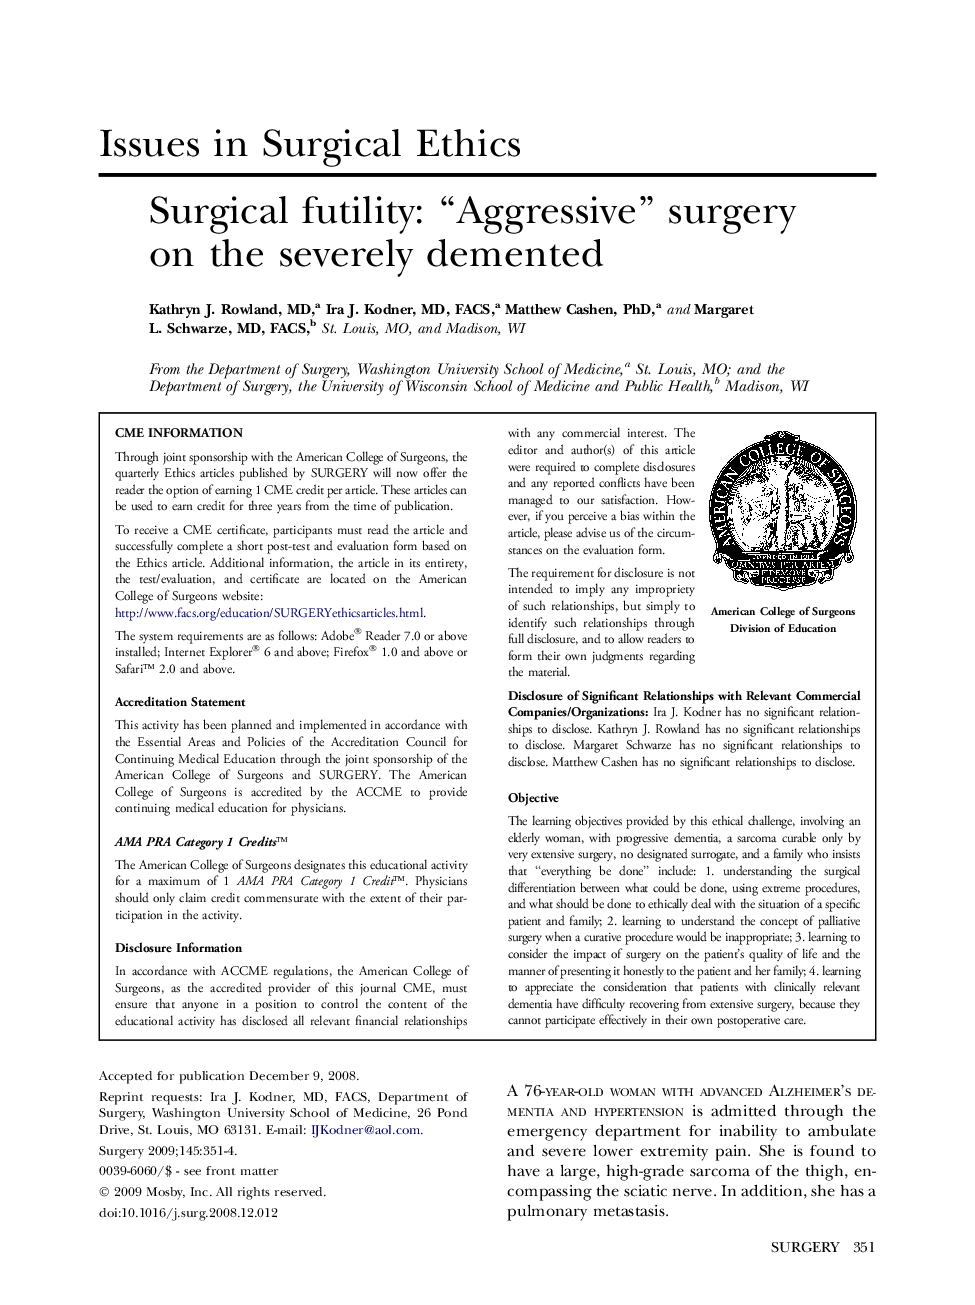 Surgical futility: “Aggressive” surgery on the severely demented